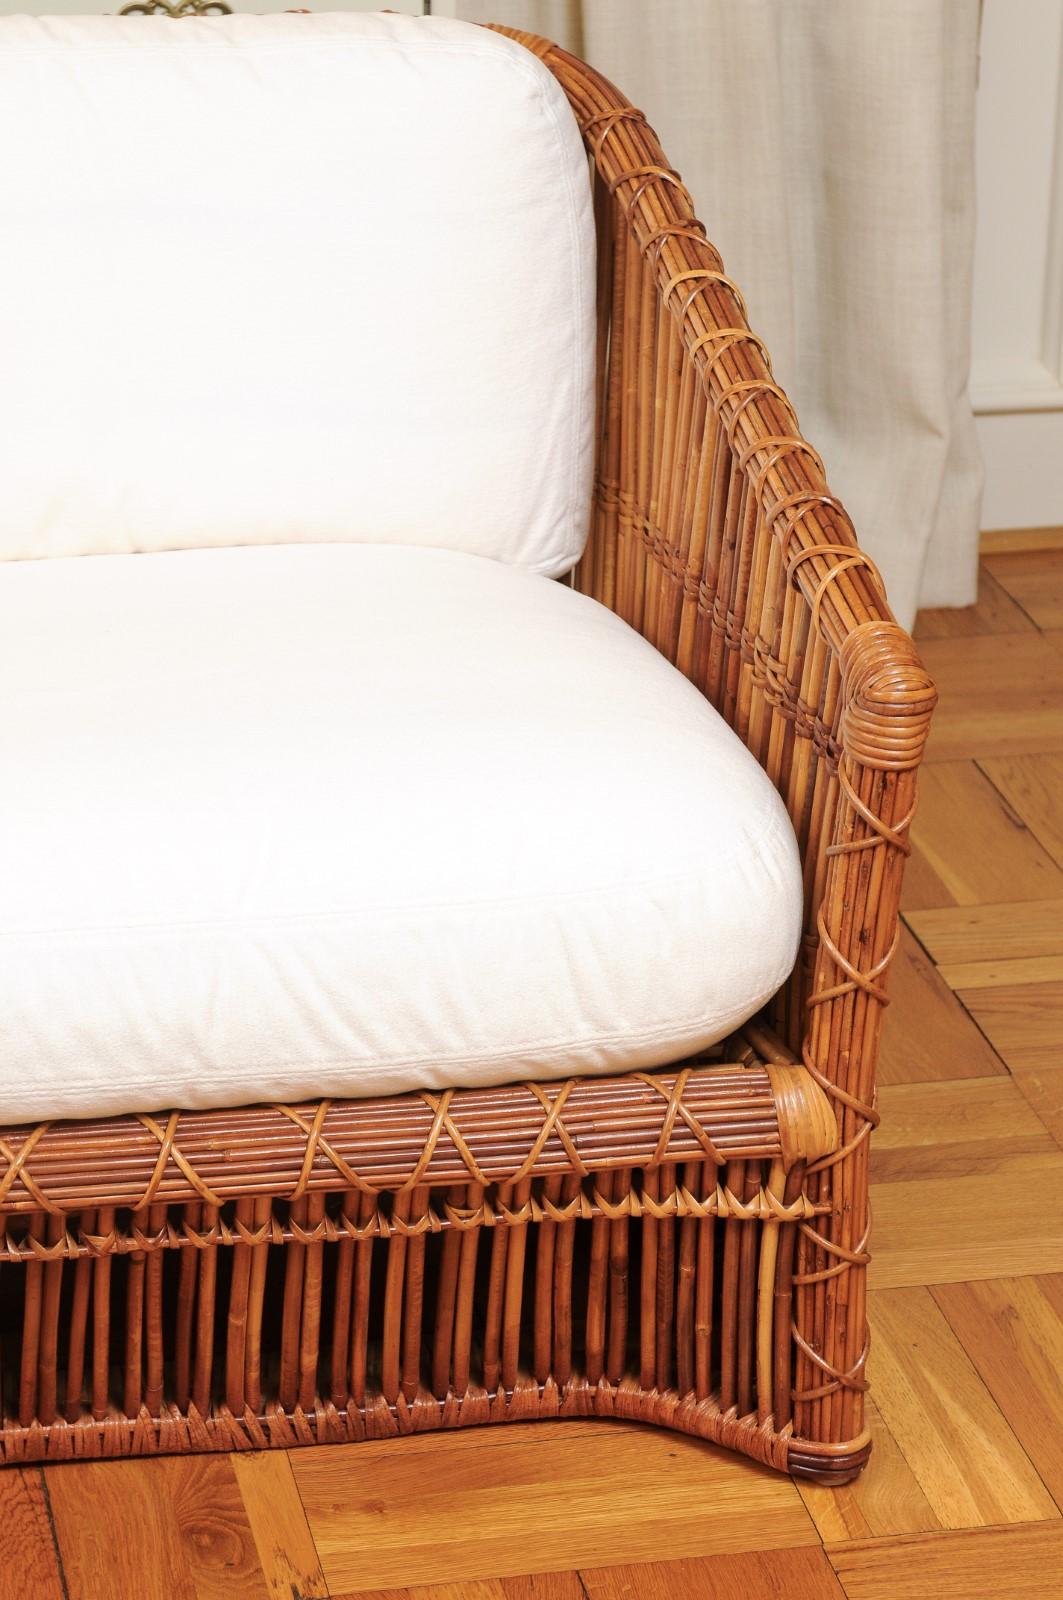 Exceptional Pair of Rattan and Cane Basket Loungers by McGuire, Circa 1975 For Sale 7